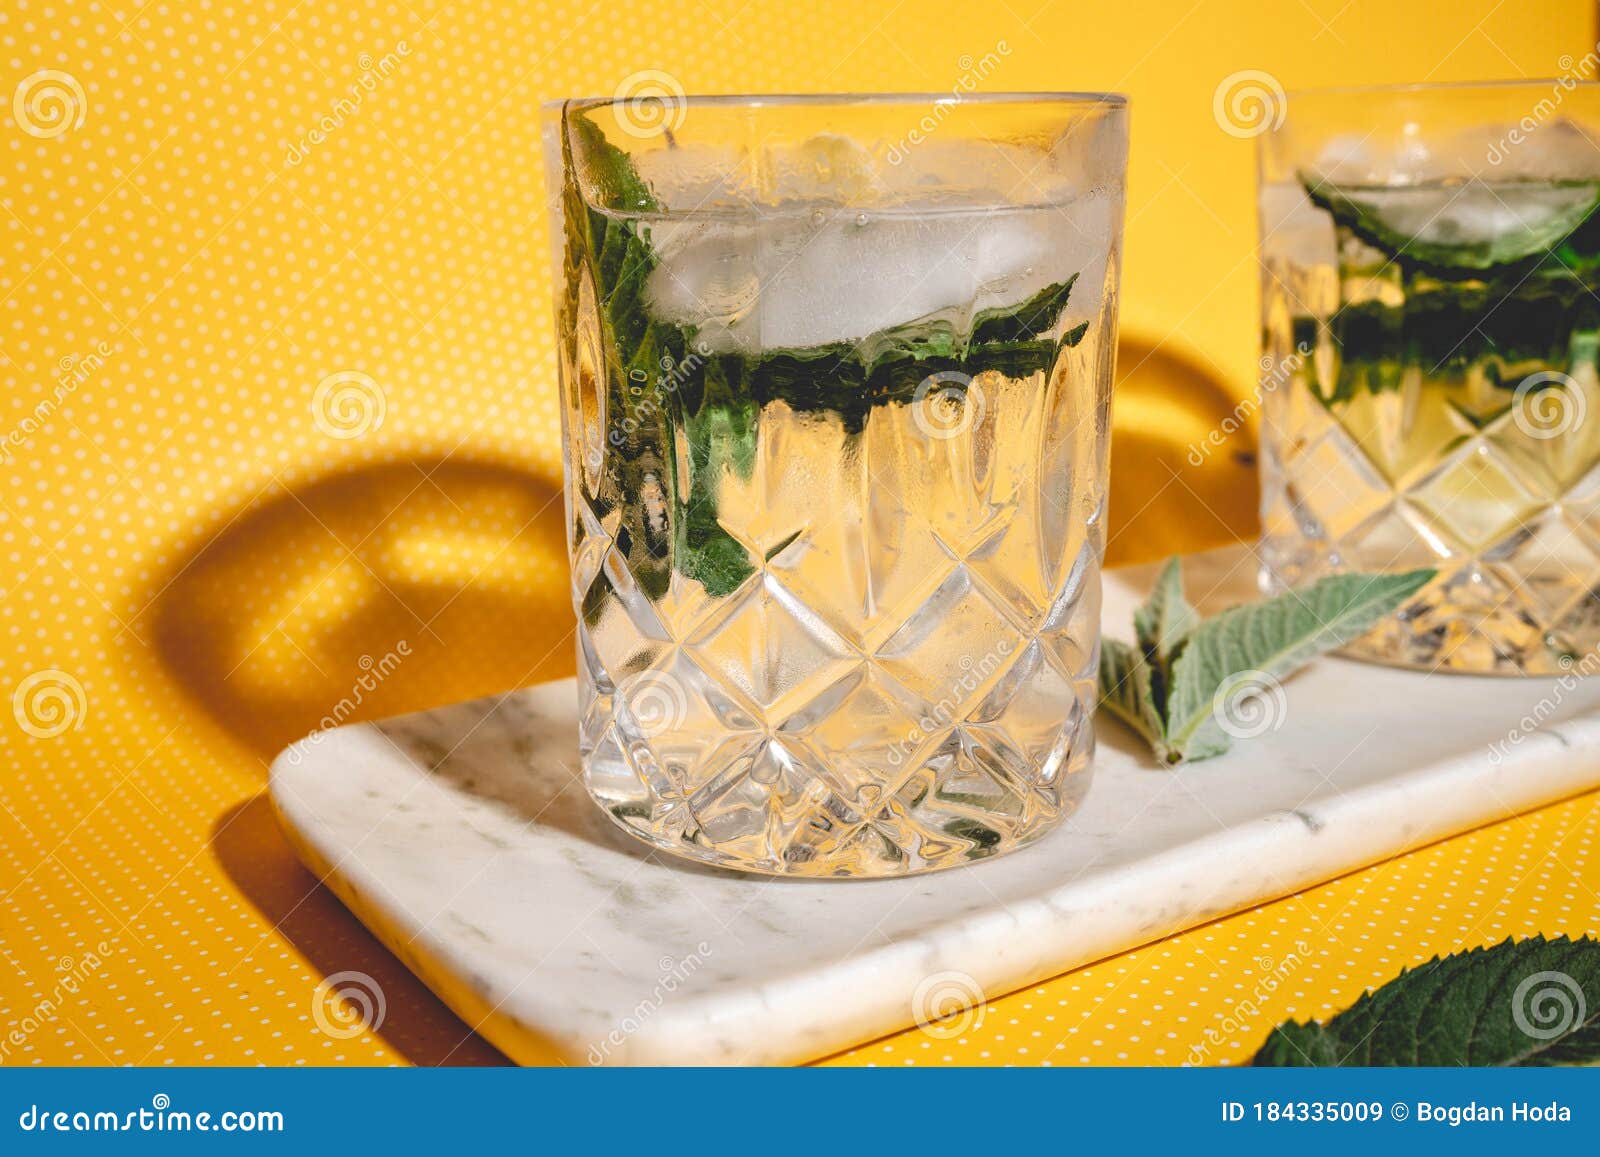 mojito alcoholic cocktails with alcohol, rum lime, mint and ice with hard lights on yellow background. mixology details and close